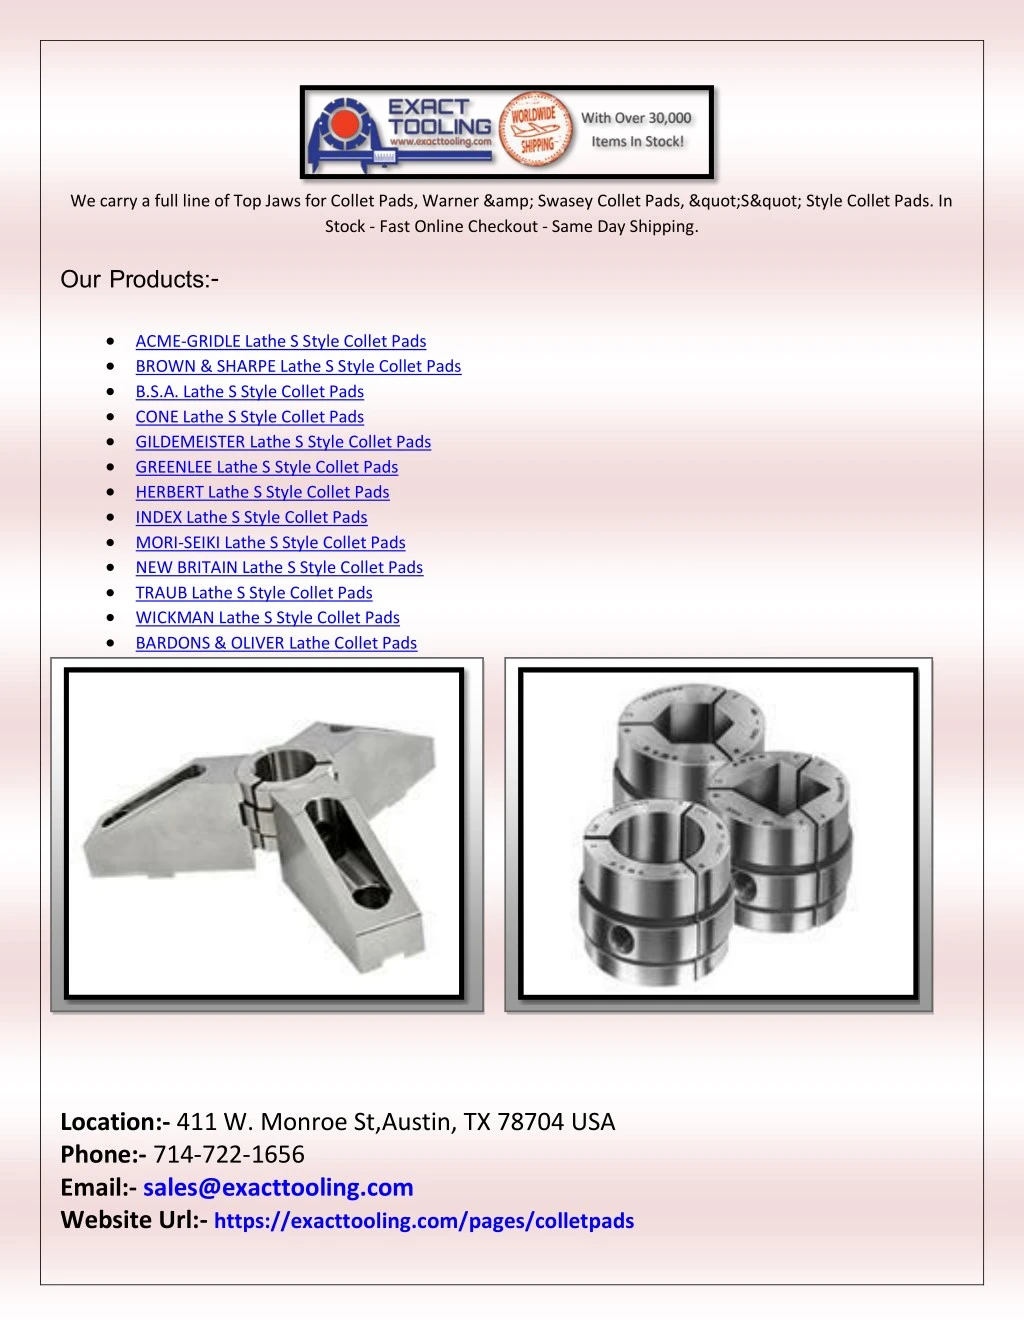 we carry a full line of top jaws for collet pads